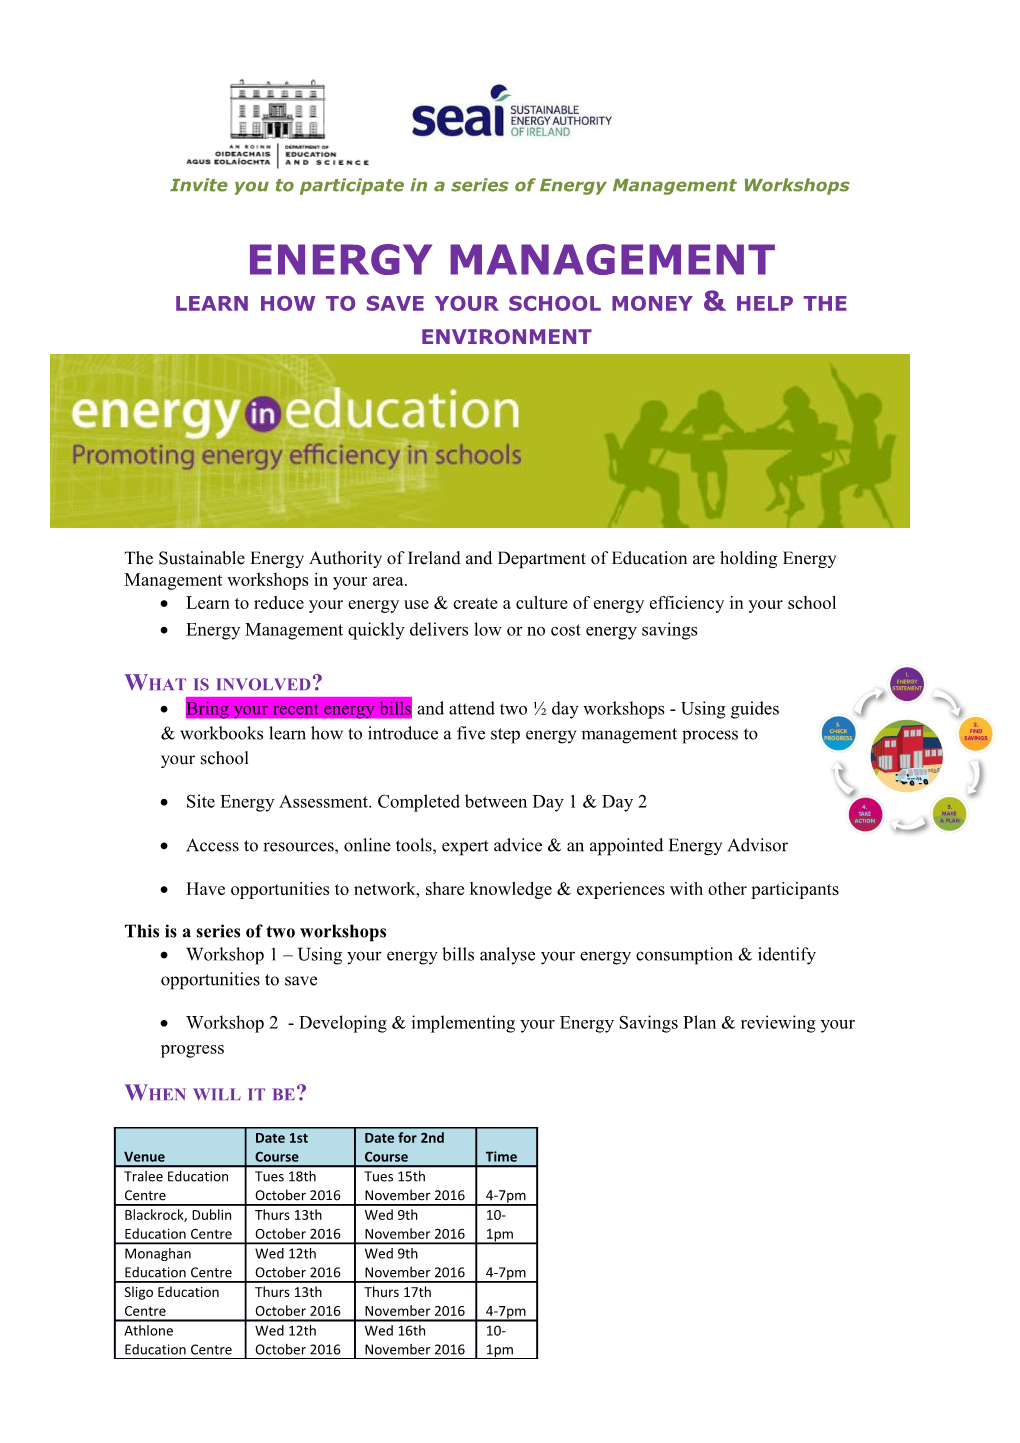 Invite You to Participate in a Series of Energy Management Workshops